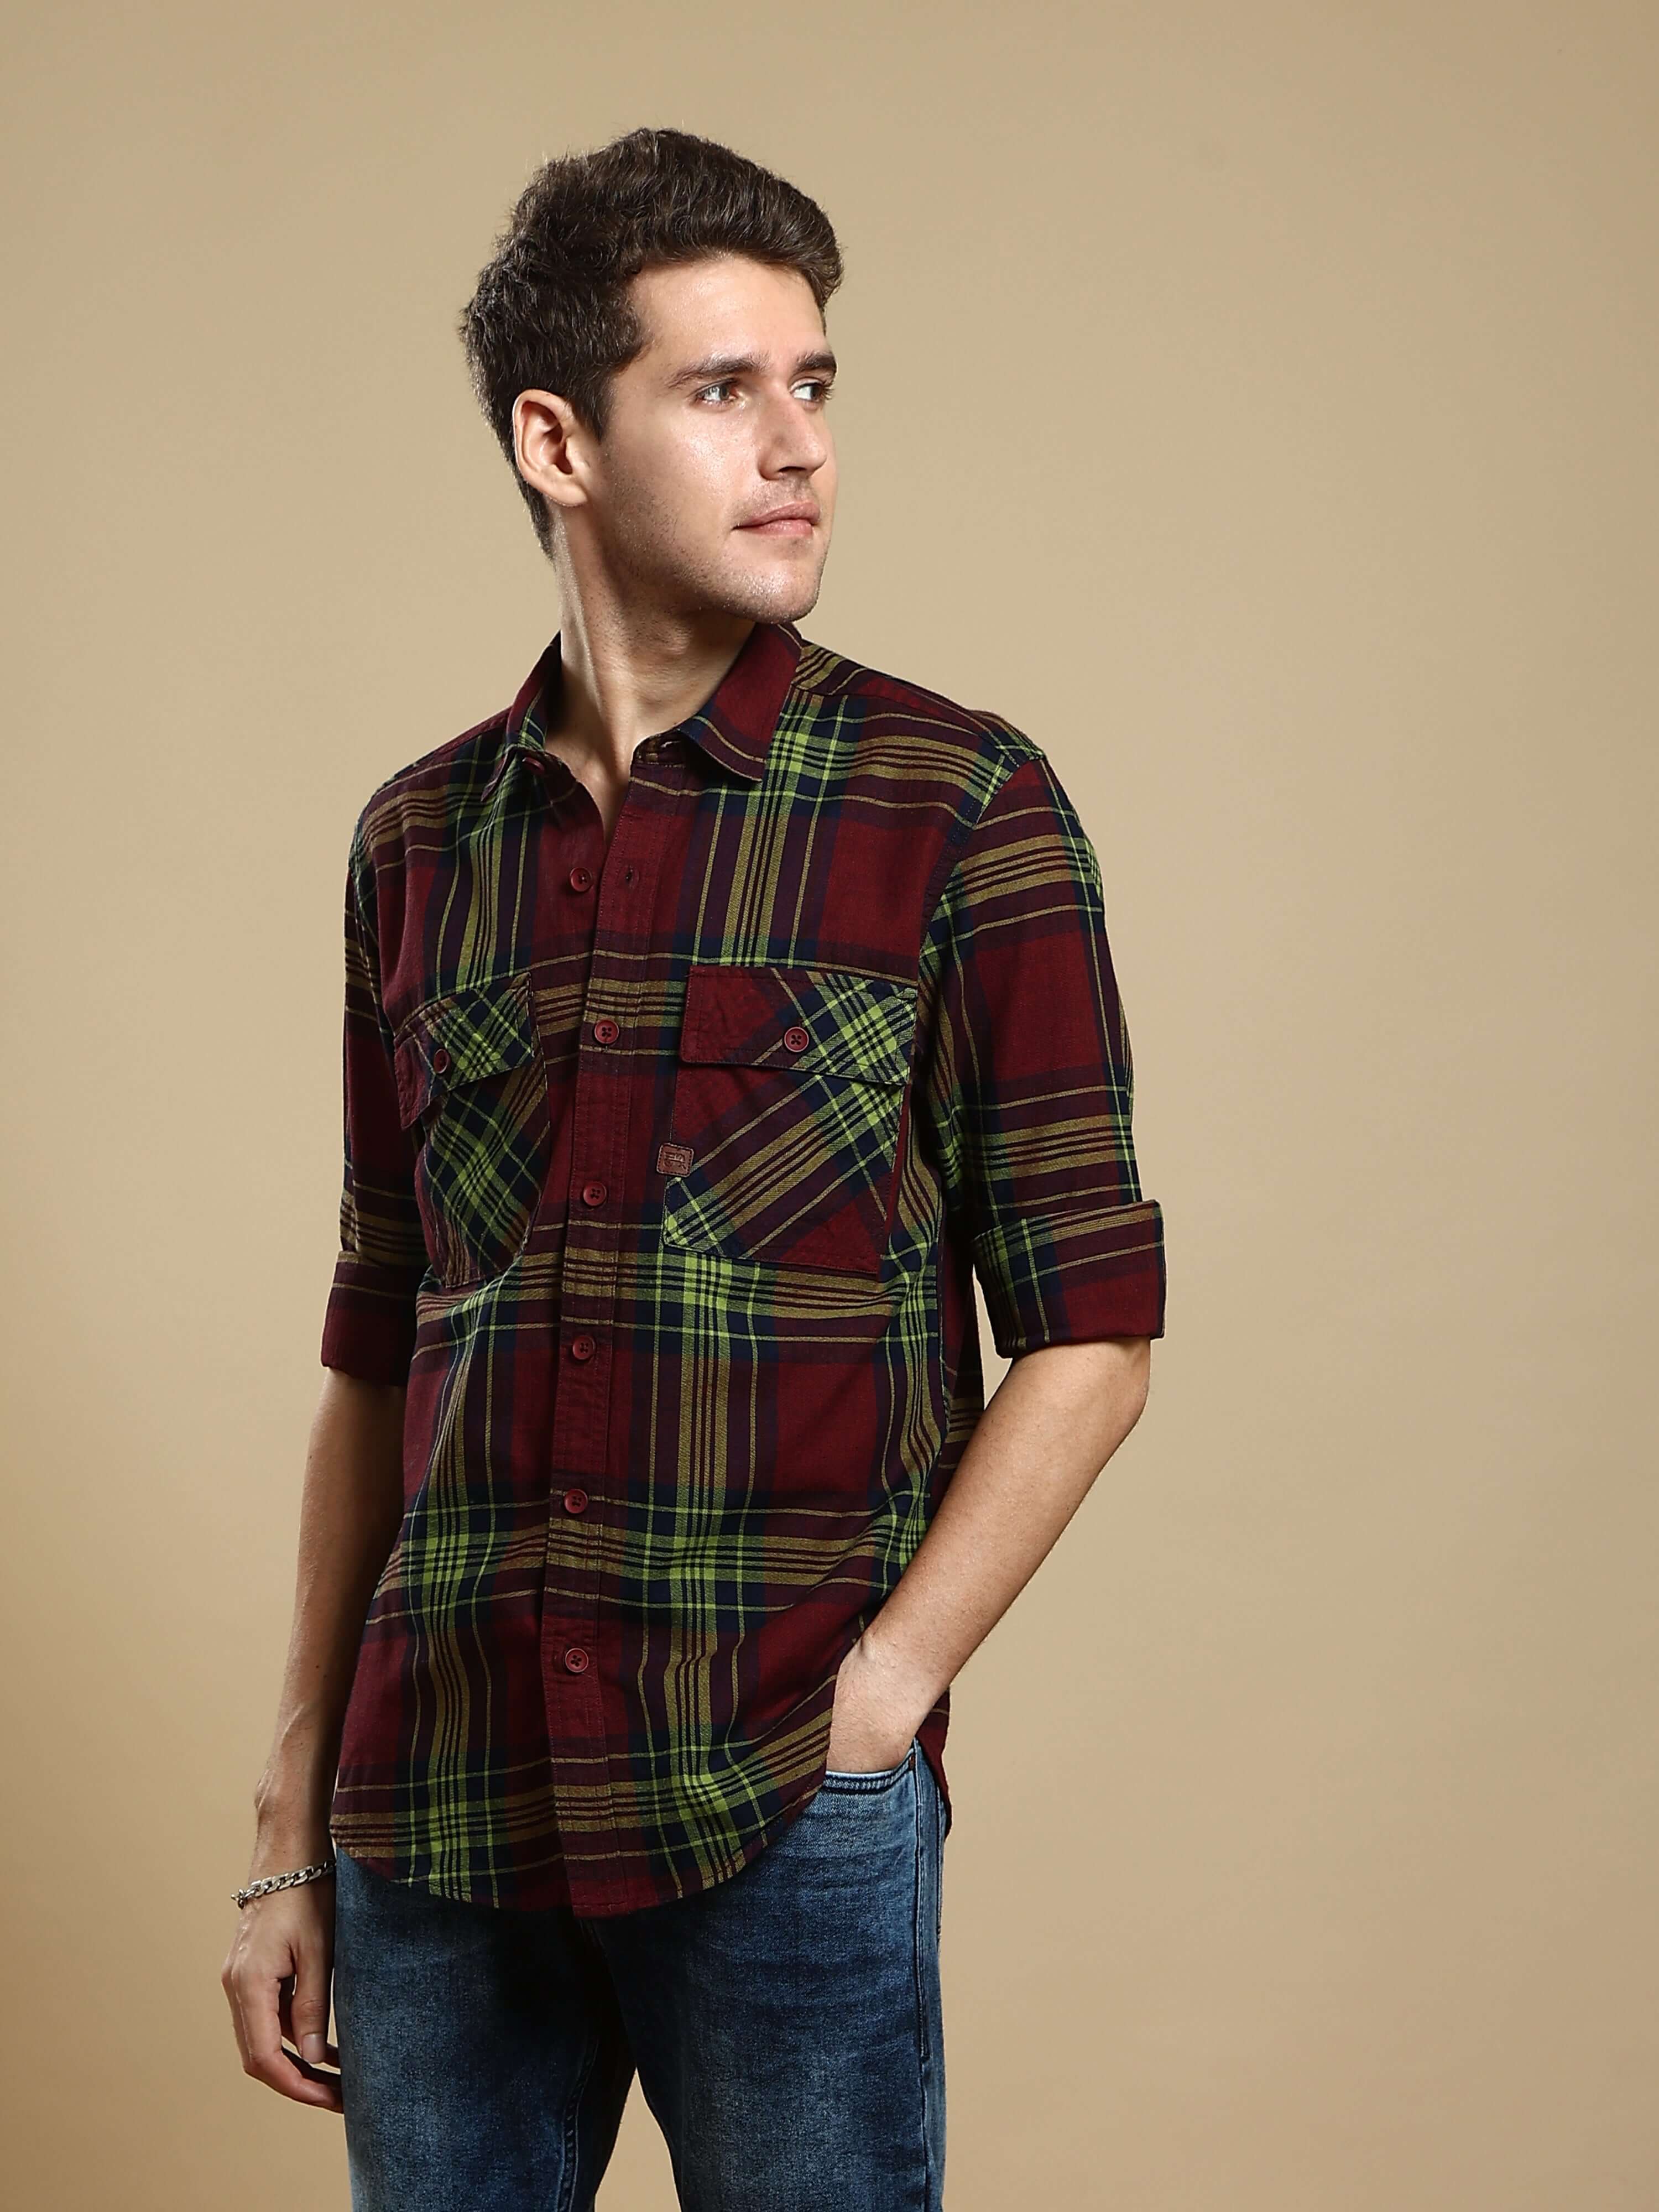 Maroon check casual full sleeve shirt shop online at Estilocus. • 100% PREMIUM COTTON • Full-sleeve solid shirt• Cut and sew placket• Regular collar• Double button square cuff.• Single pocket with logo embroidery• Curved hemline• Finest quality sewing wit